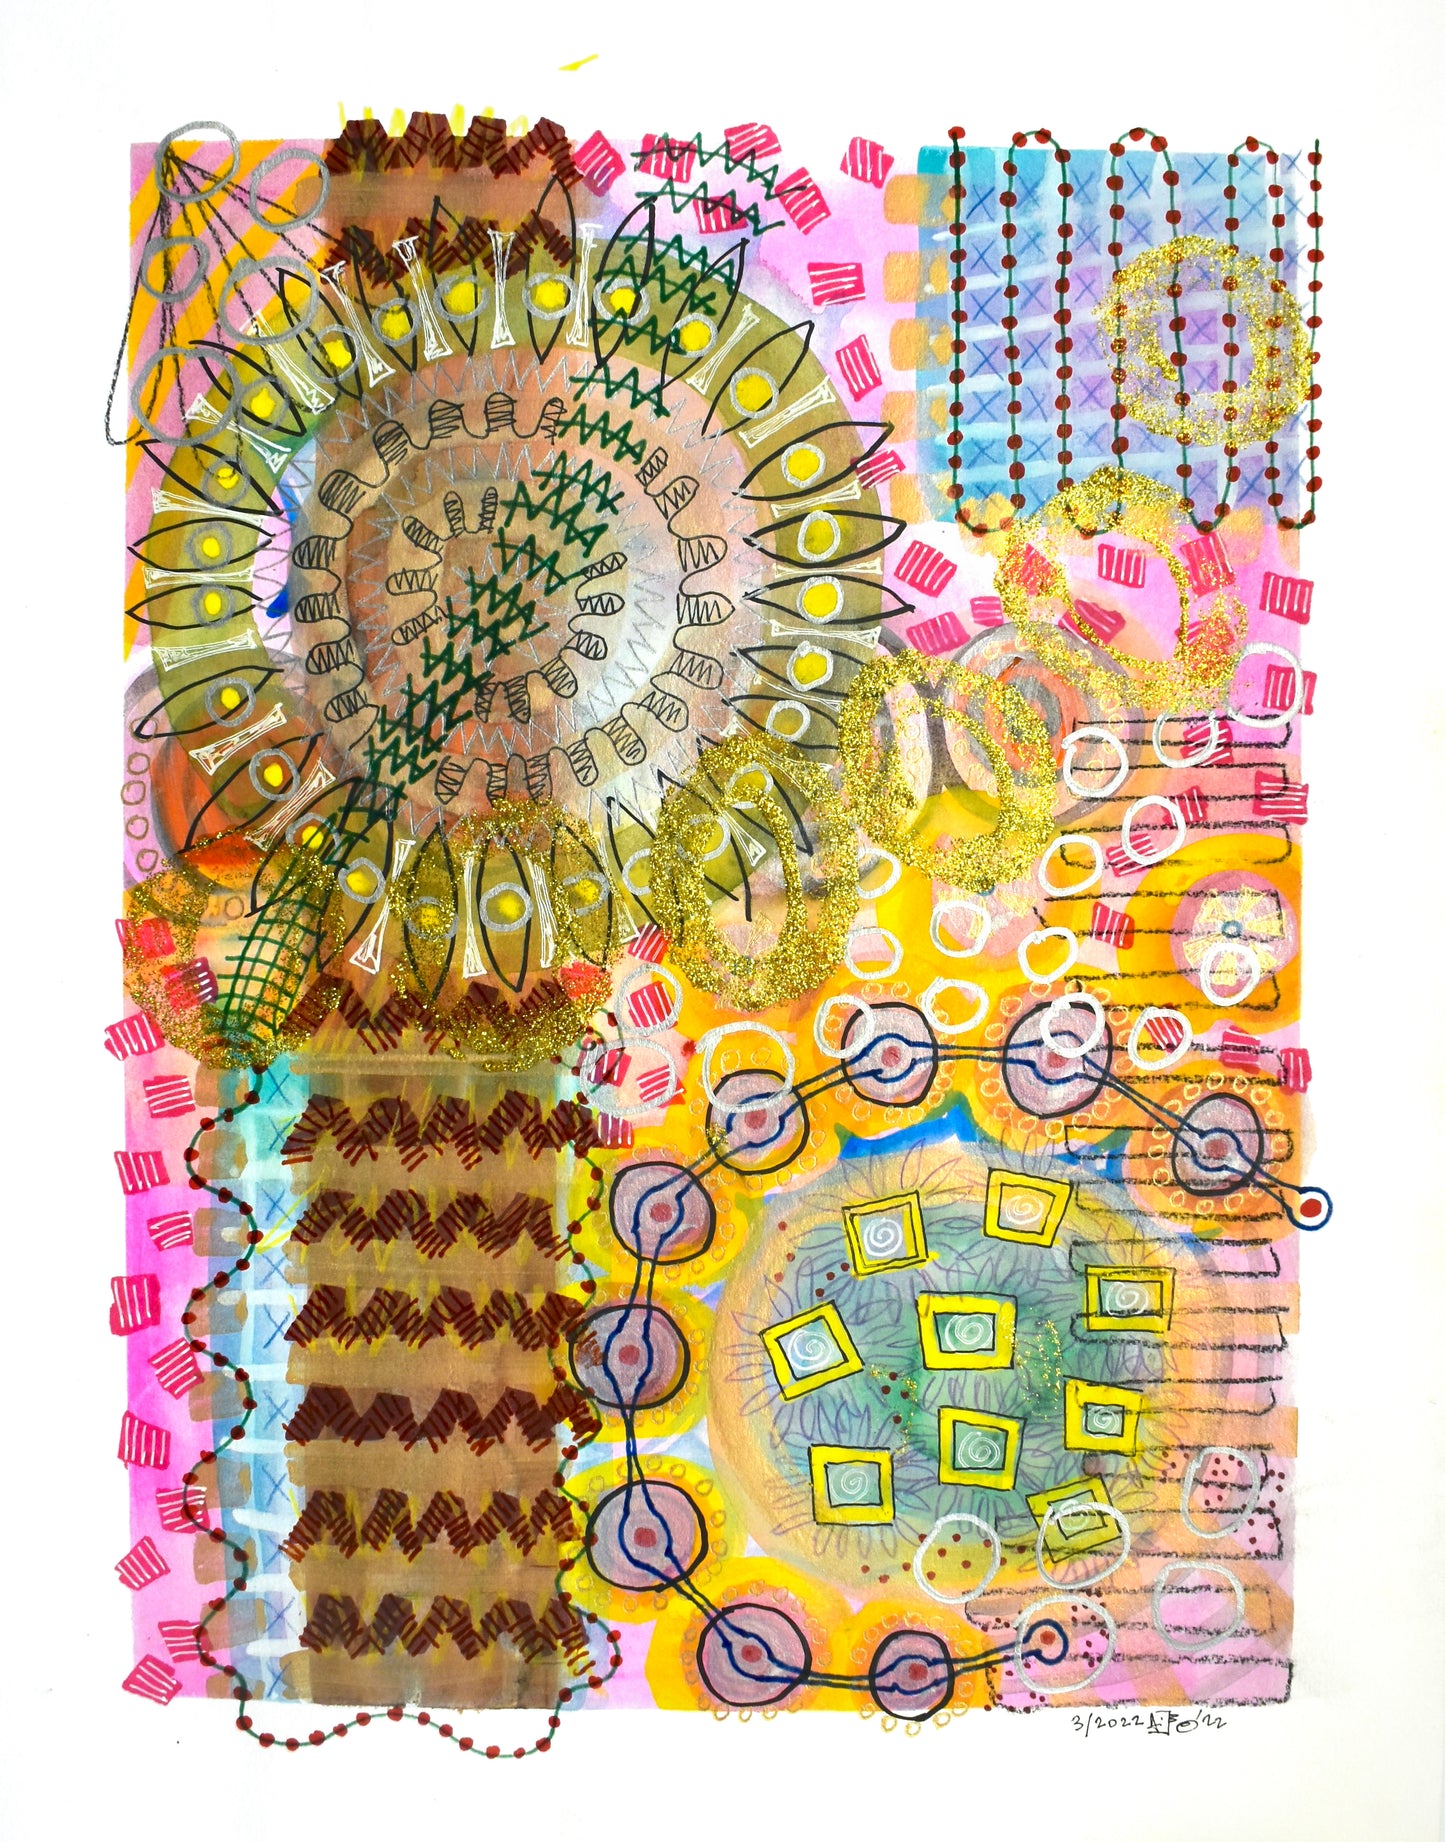 Colorful mixed media featuring numerous shapes, including zig zags, circles, lines, dots. Pen and ink; artist Jenifer Hernandez; 11"Wx14"H